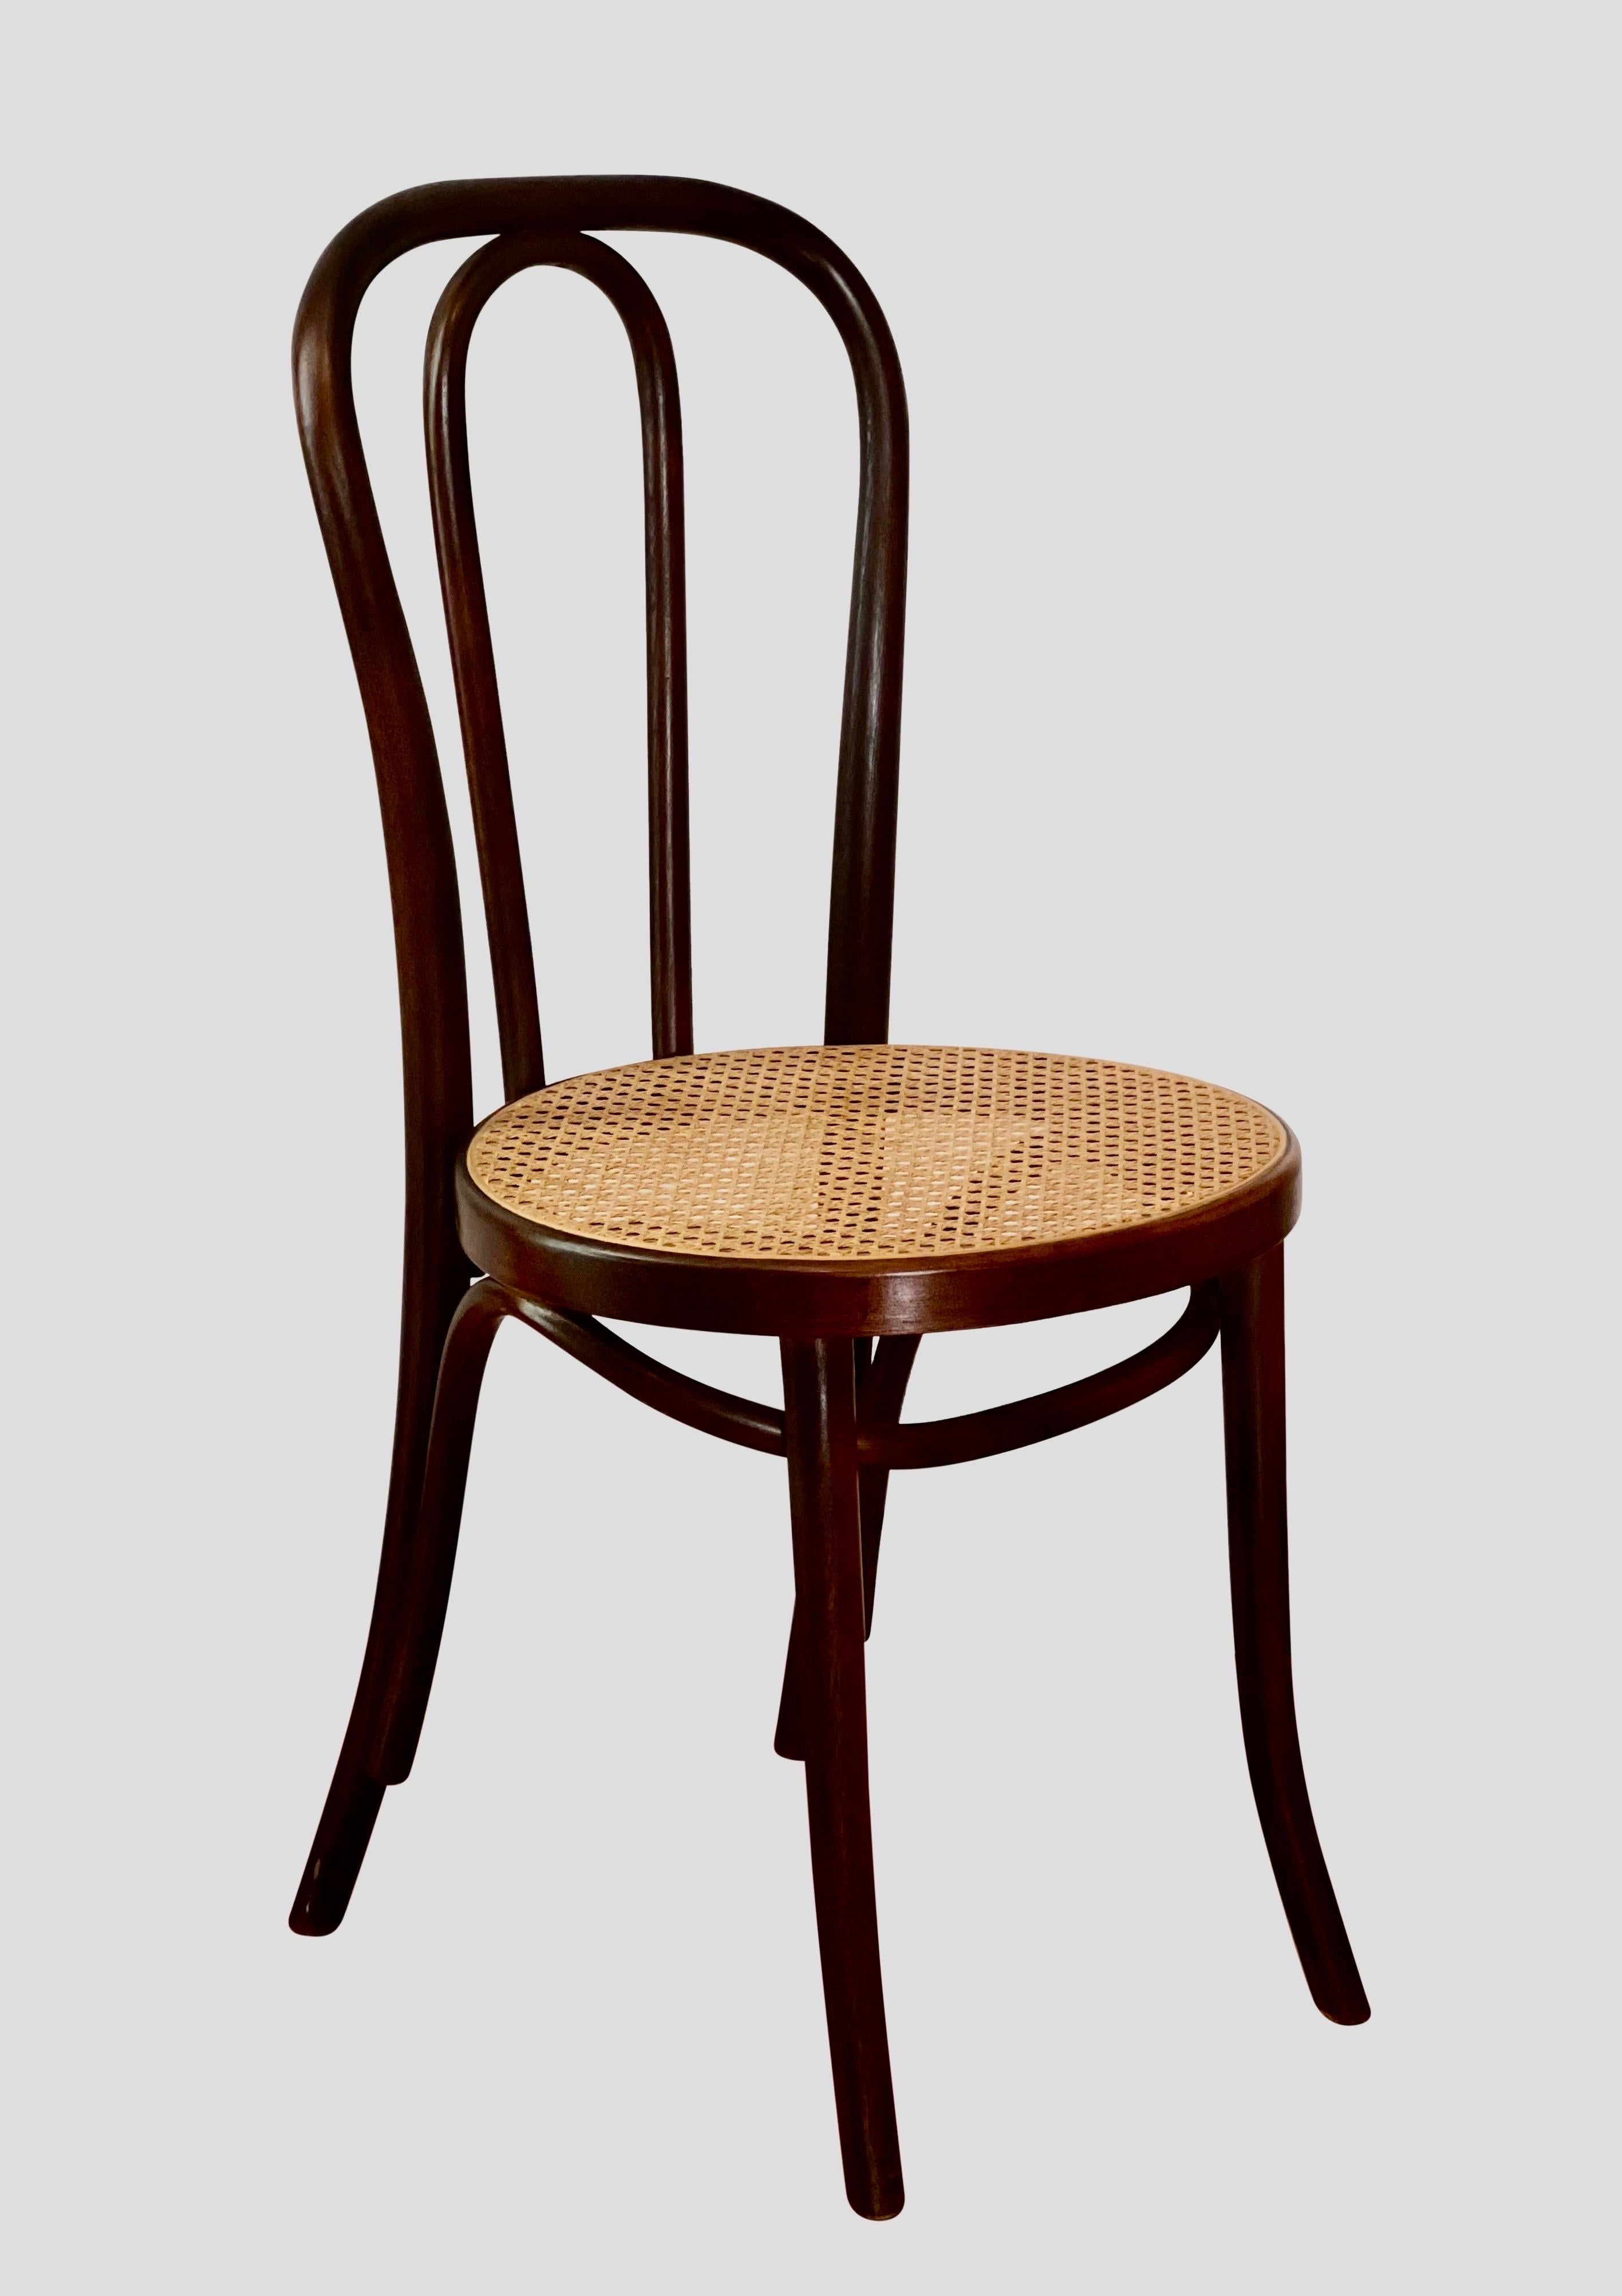 antique bentwood chairs for sale